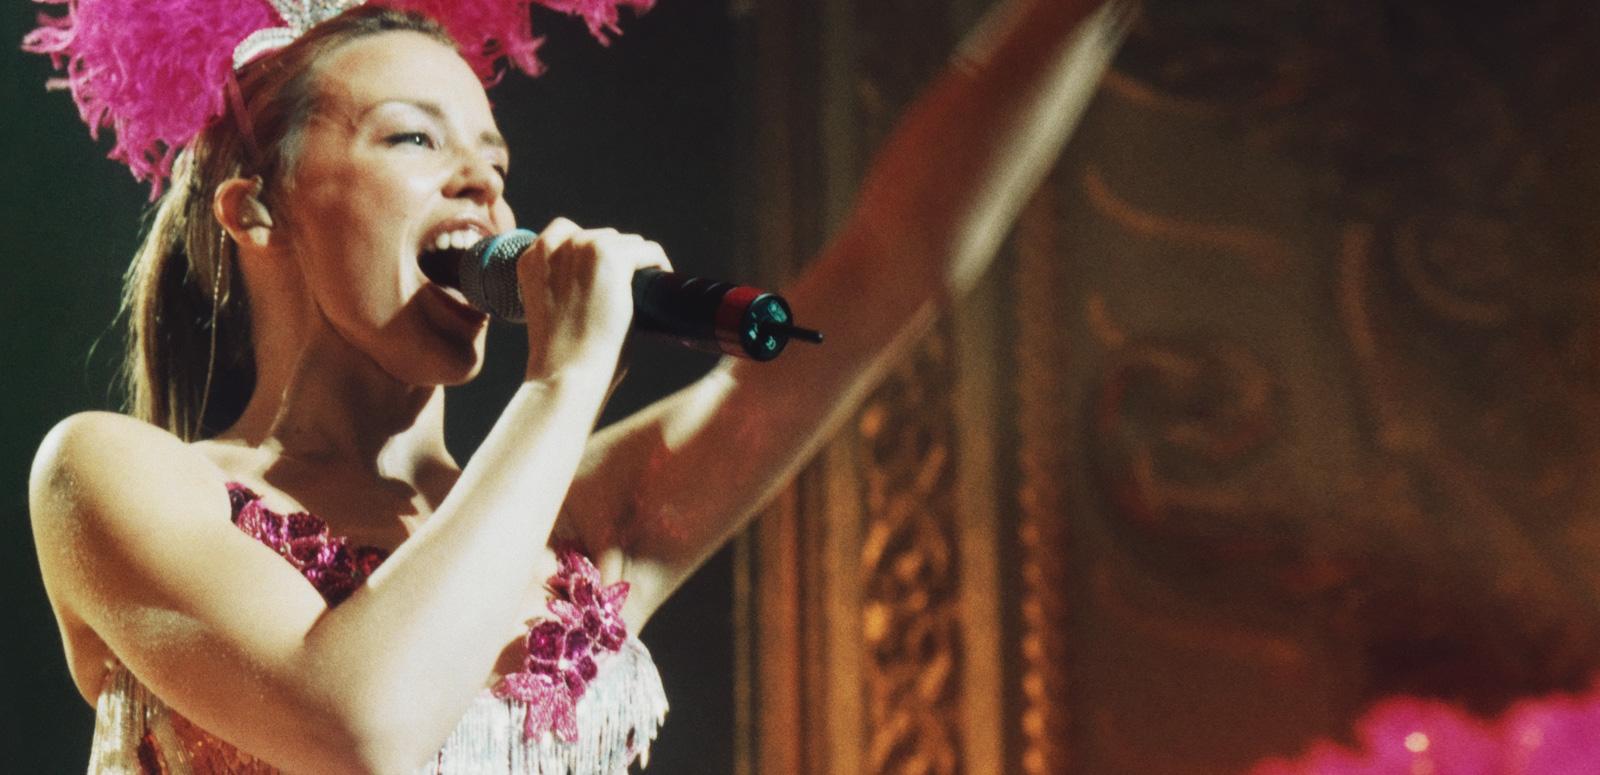 Kylie Minogue on stage in a pink showgirl costume singing into a microphone.